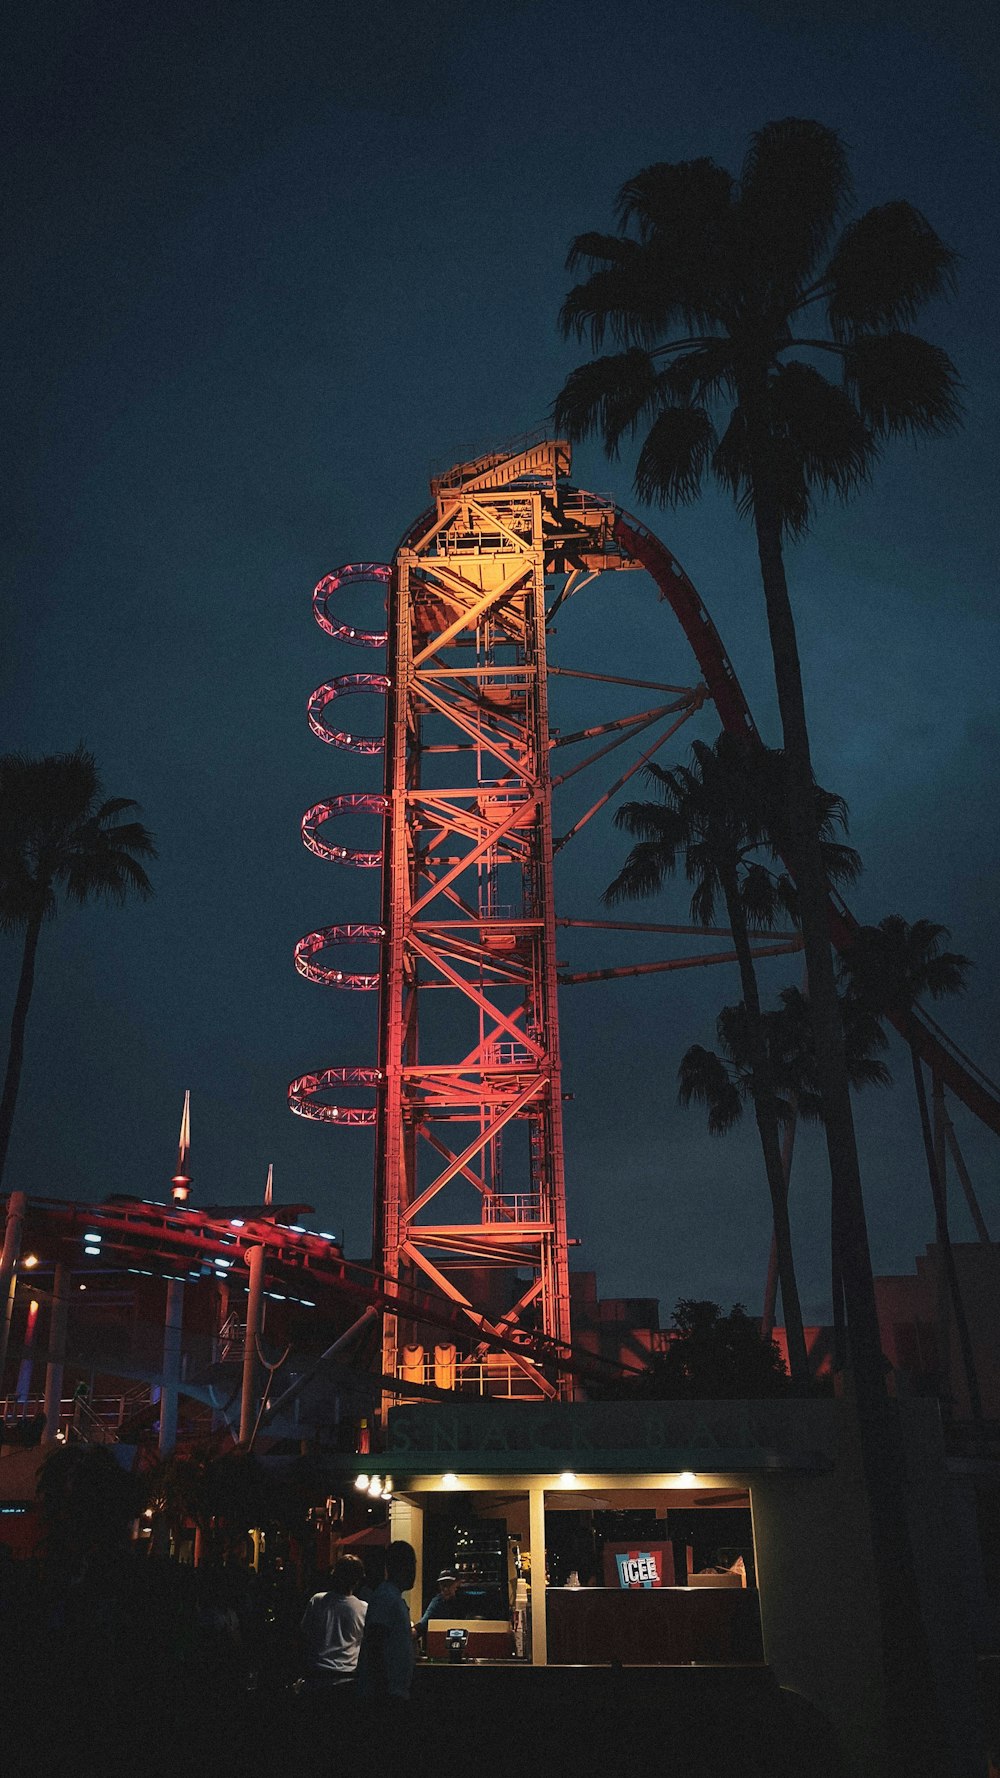 a large red and white roller coaster at night